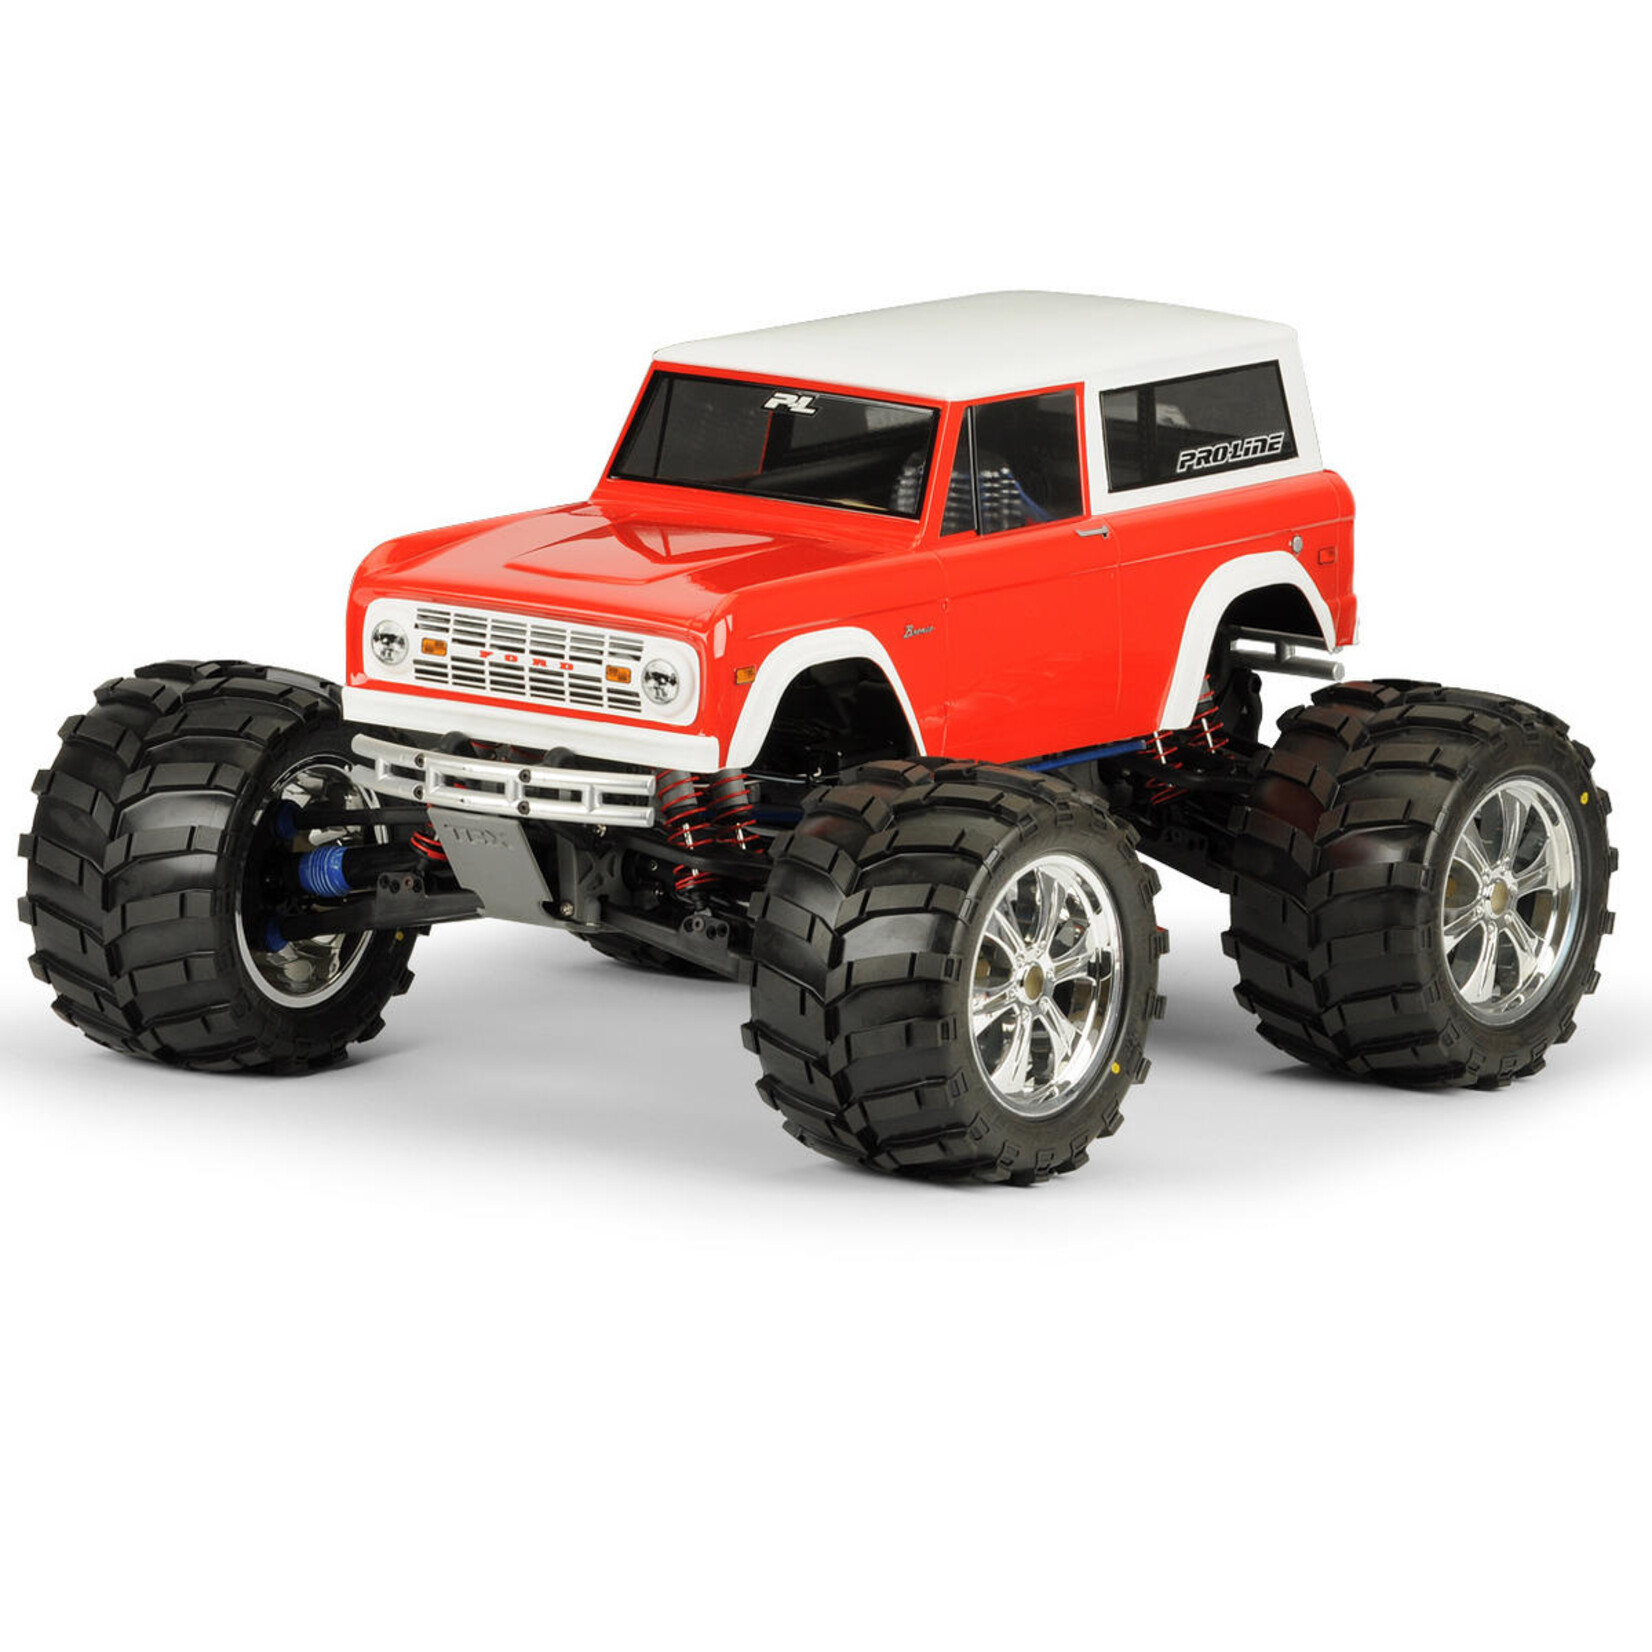 Pro-Line Pro-Line 1973 Ford Bronco Body (Clear) #3313-60